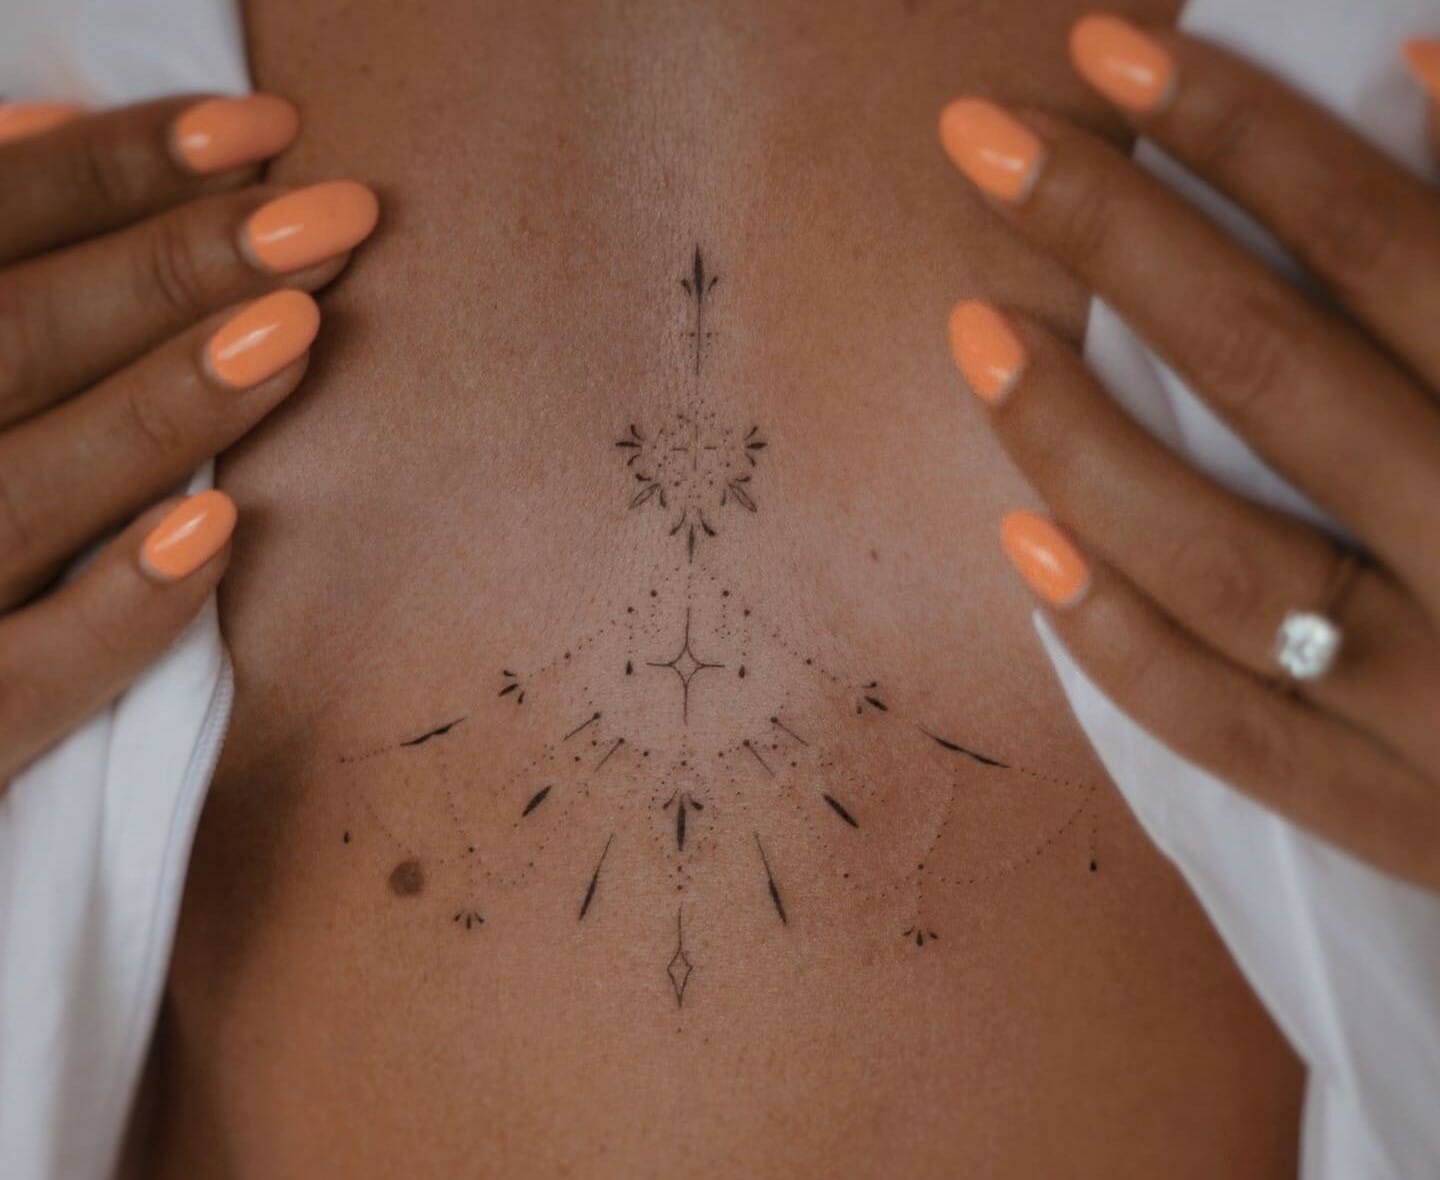 sternum tattoos as a cool and trendy tattoo trend that is not well-known to everyone. It also mentions the source of the information "I AM CO", which could be a website or a publication.